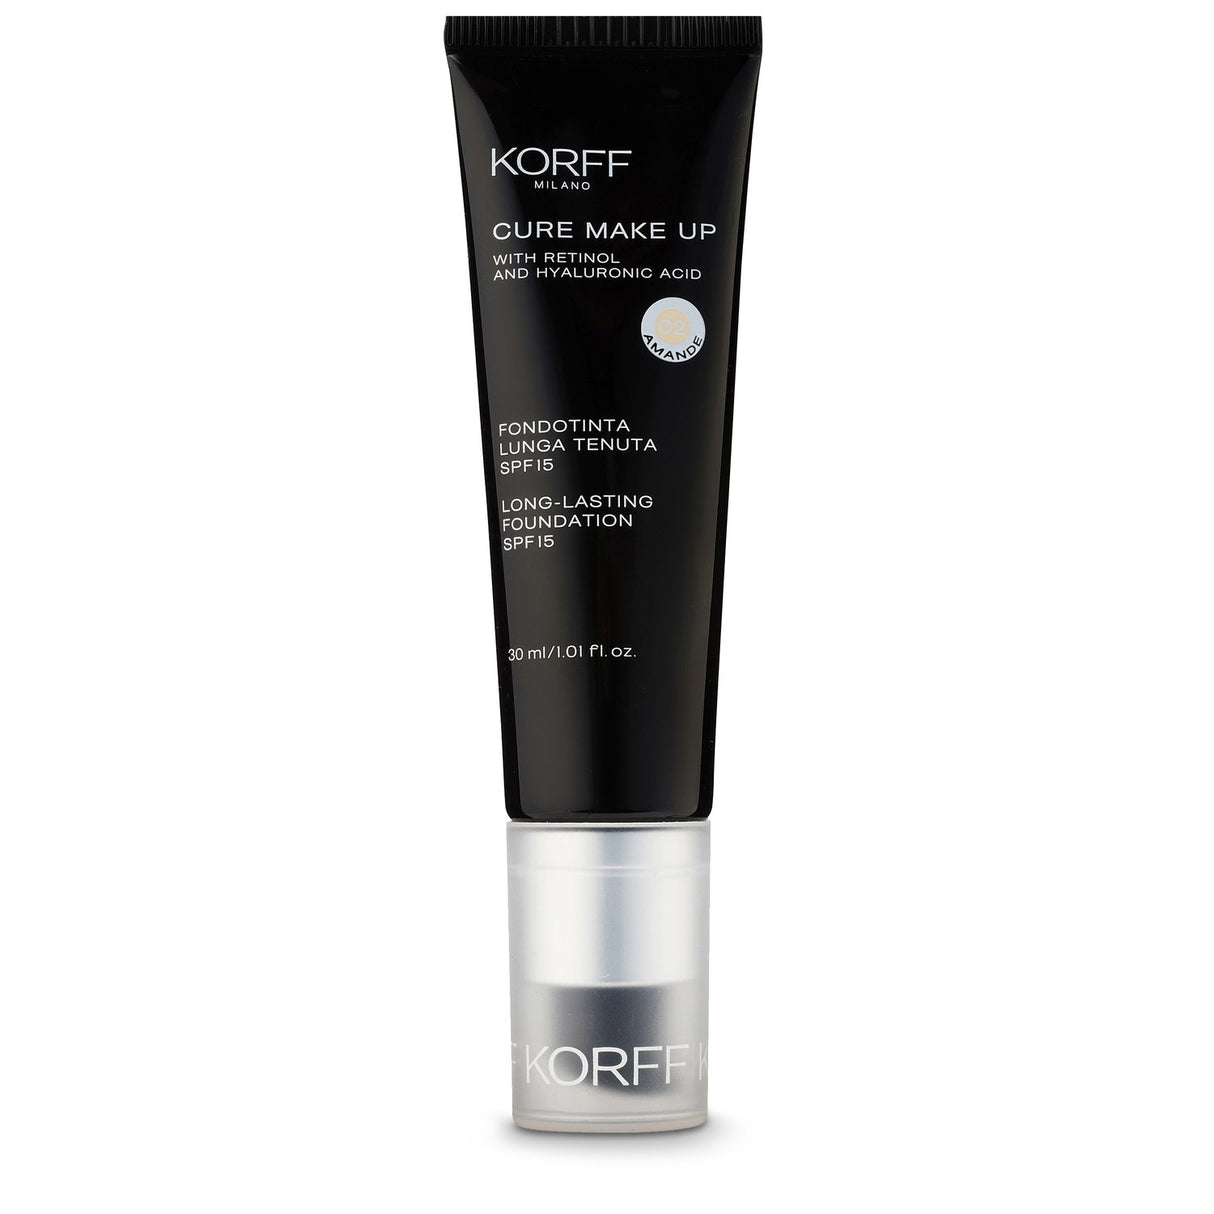 Long-lasting foundation with matting effect, SPF15